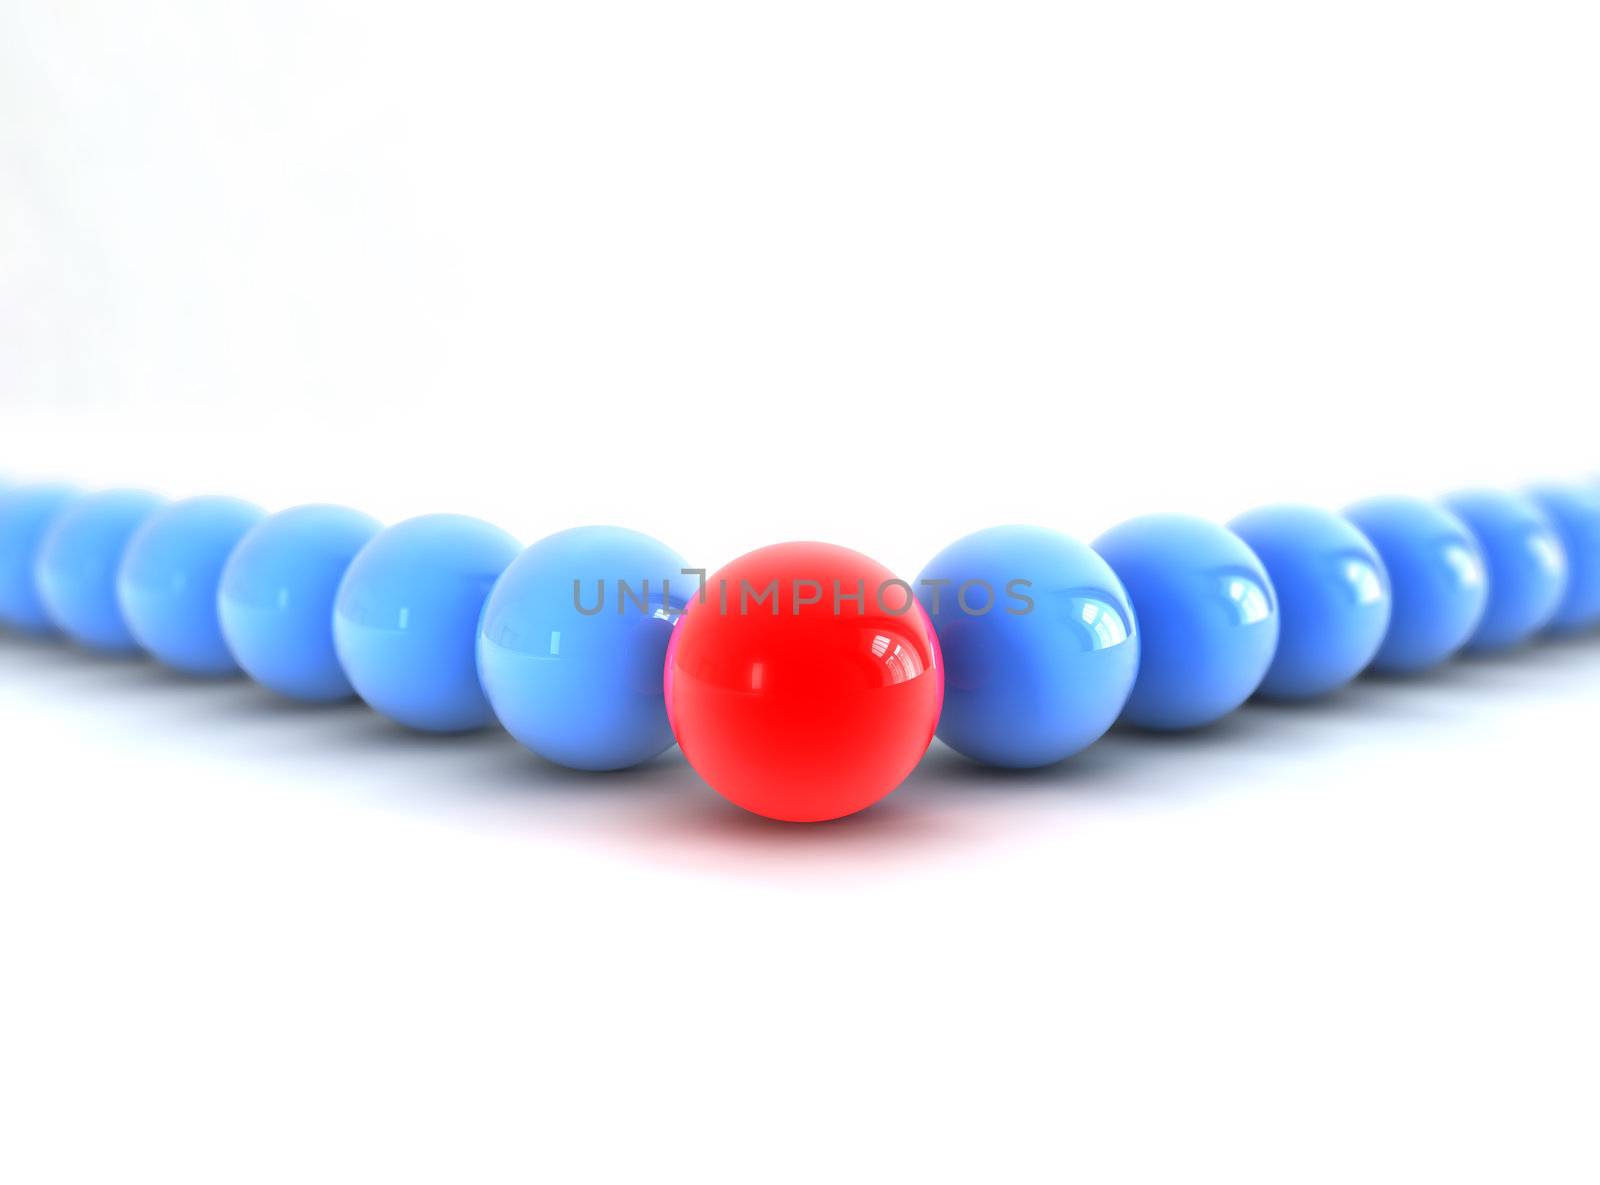 Composition of blue spheres wit one red